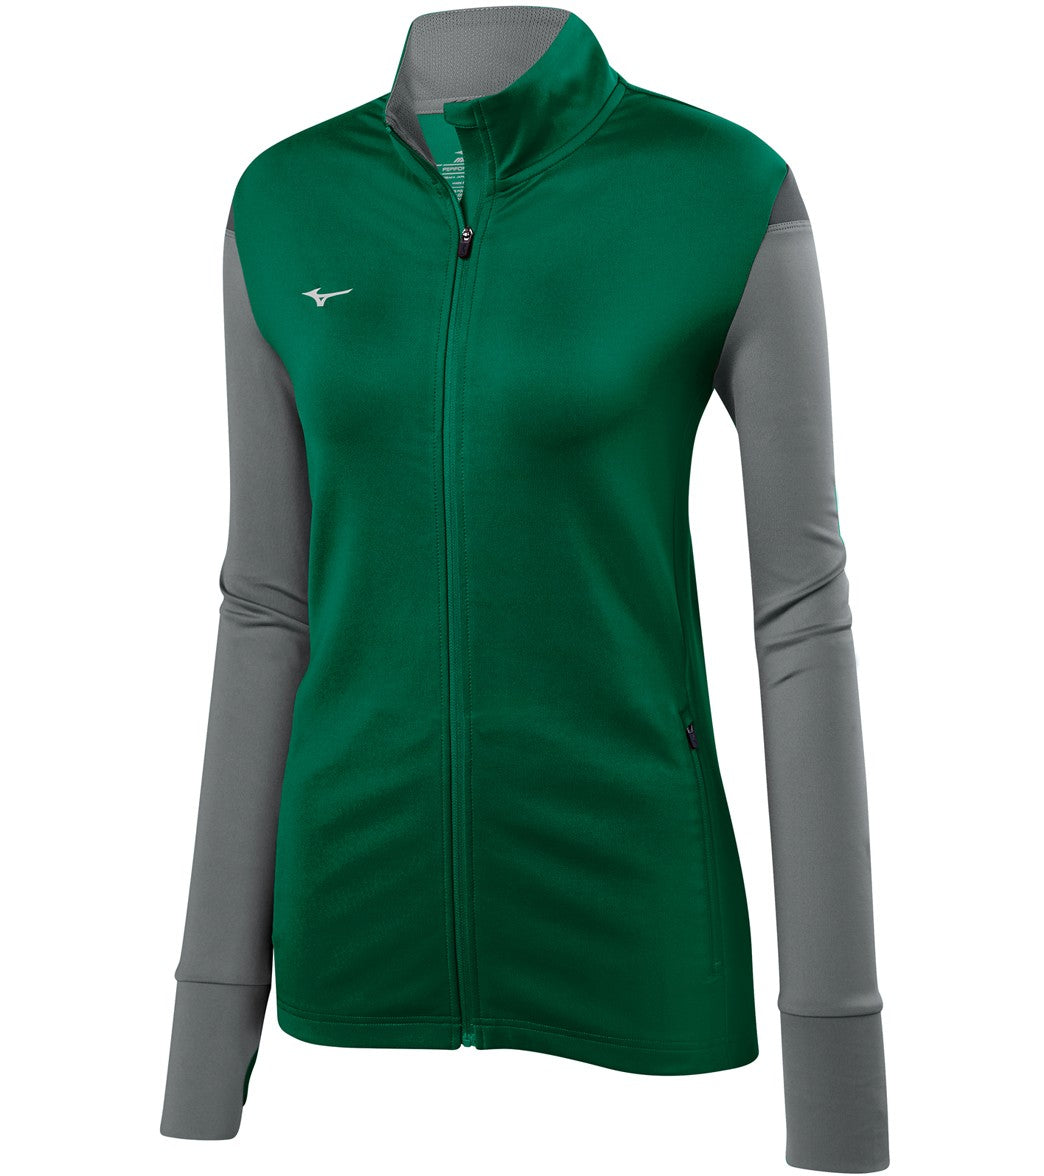 Mizuno Girls' Horizon Full Zip Volleyball Jacket - Forest/Grey/Charcoal Large Cotton/Polyester - Swimoutlet.com